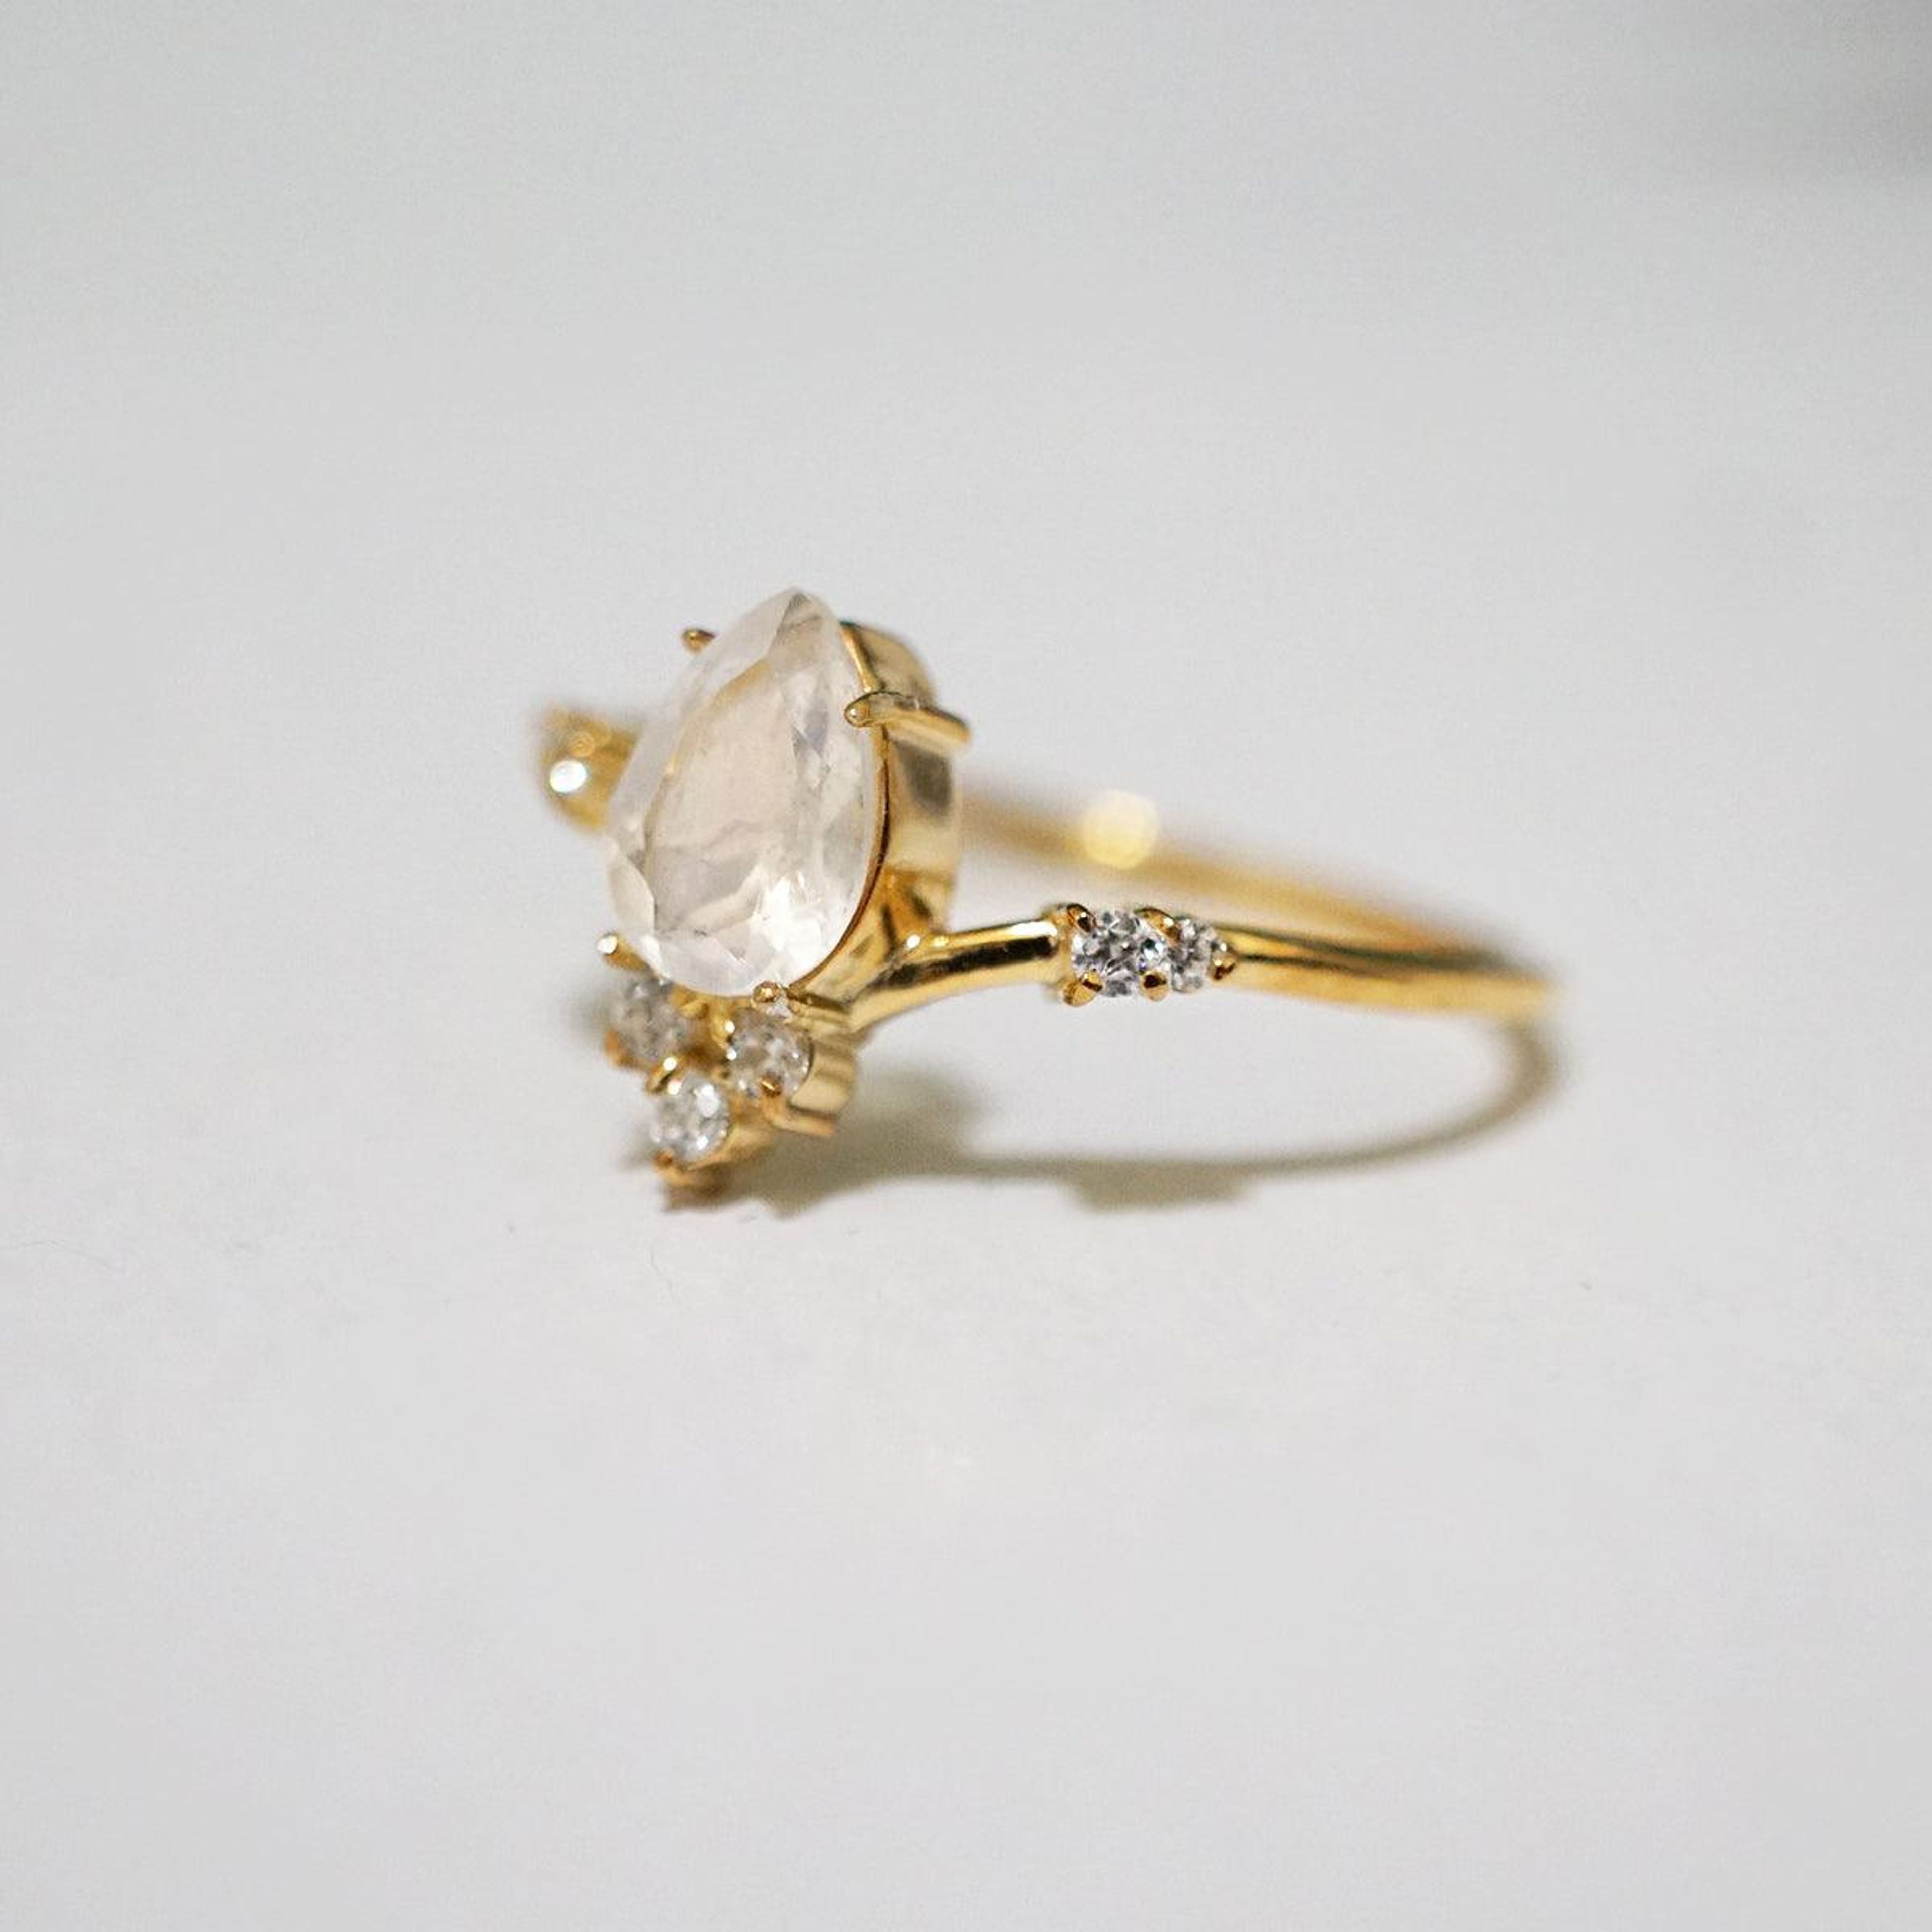 Moonstone Blossom Ring in Vermeil, 10K and 14K Gold